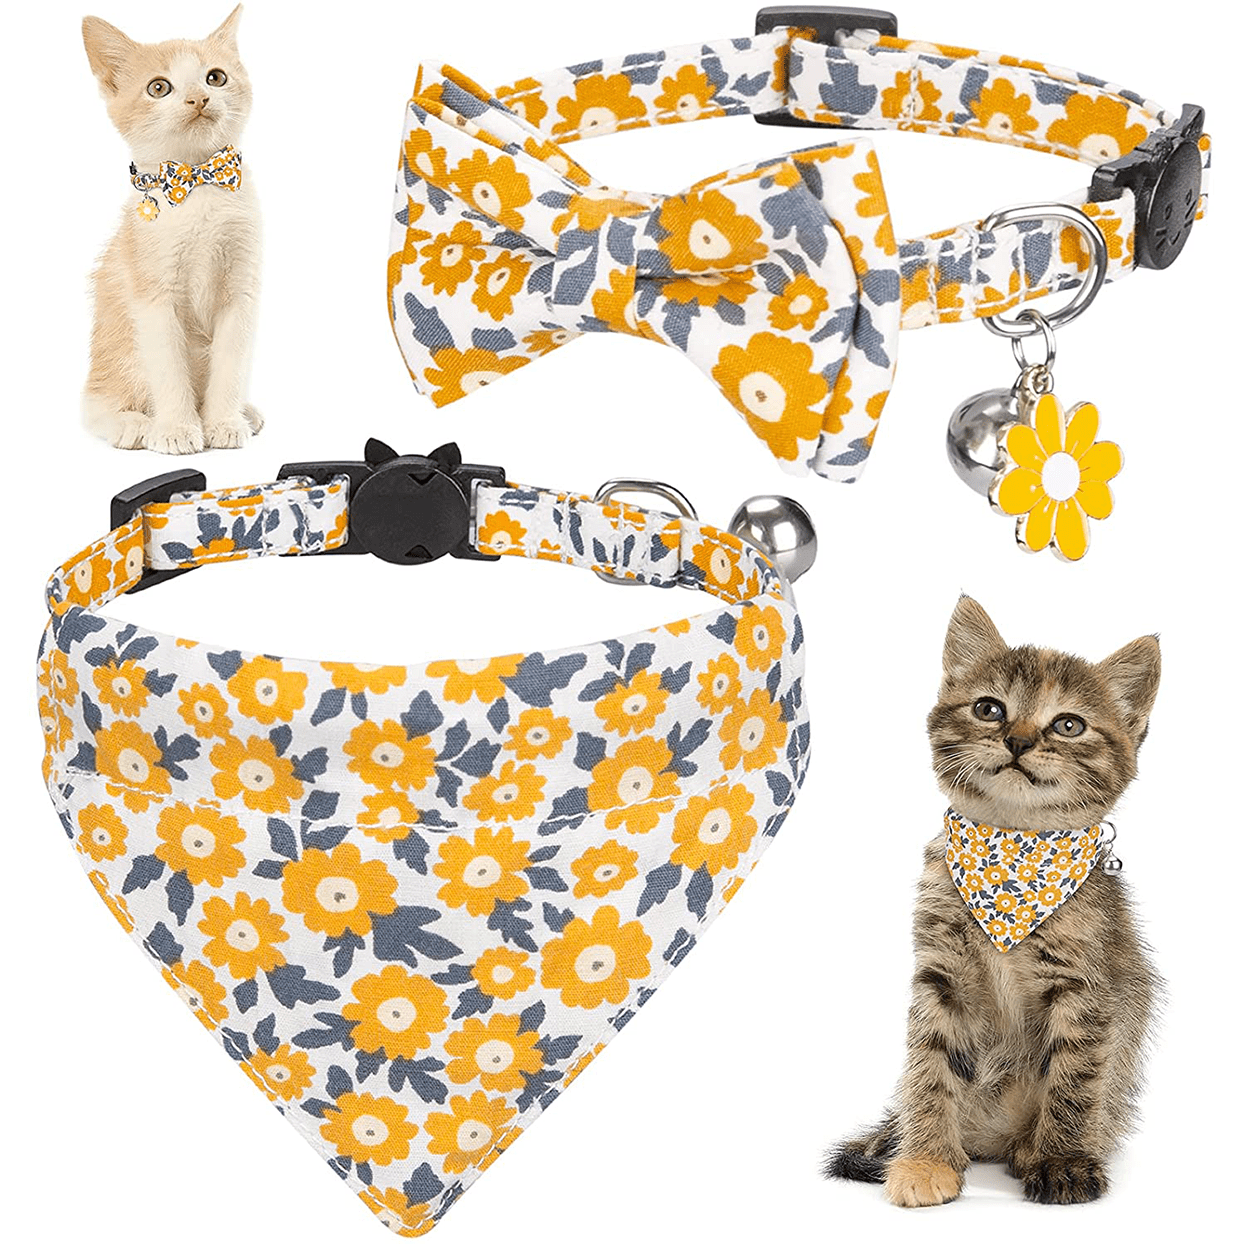 2 Packs Breakaway Cat Collars with Bells PAWCHIE Bowtie Cat Collar Bandana Set Plaid Checked Classic Style for Cats Kitten Puppy Small Dogs